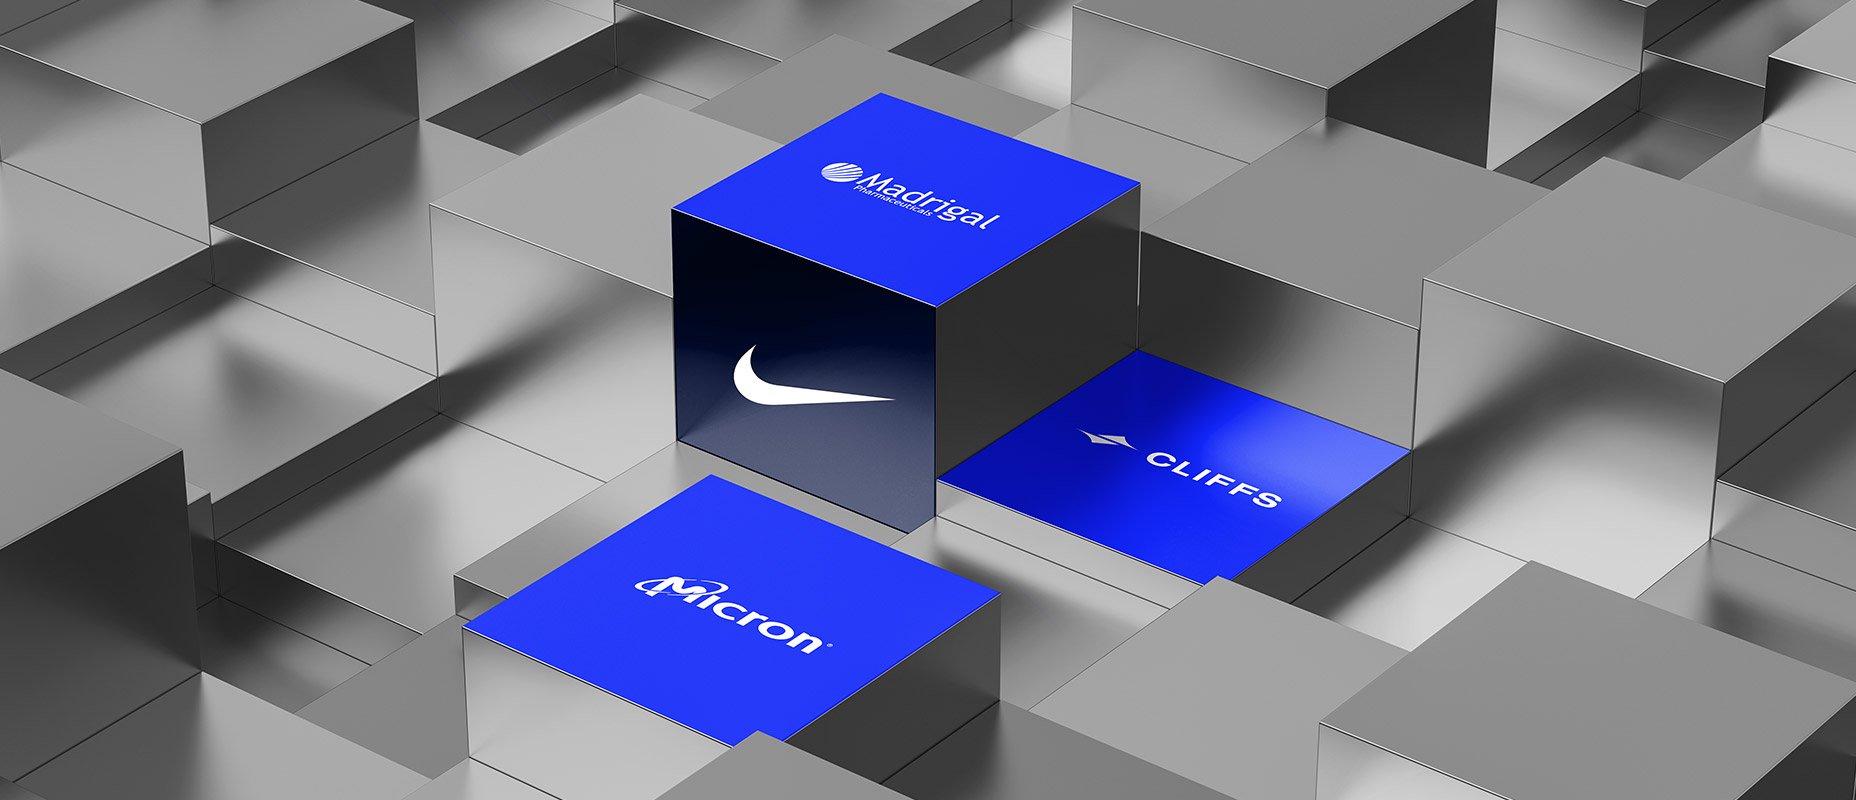 Nike, Micron, Cleveland-Cliffs, and Madrigal Pharmaceuticals: Weekly Digest (19 December – 23 December)